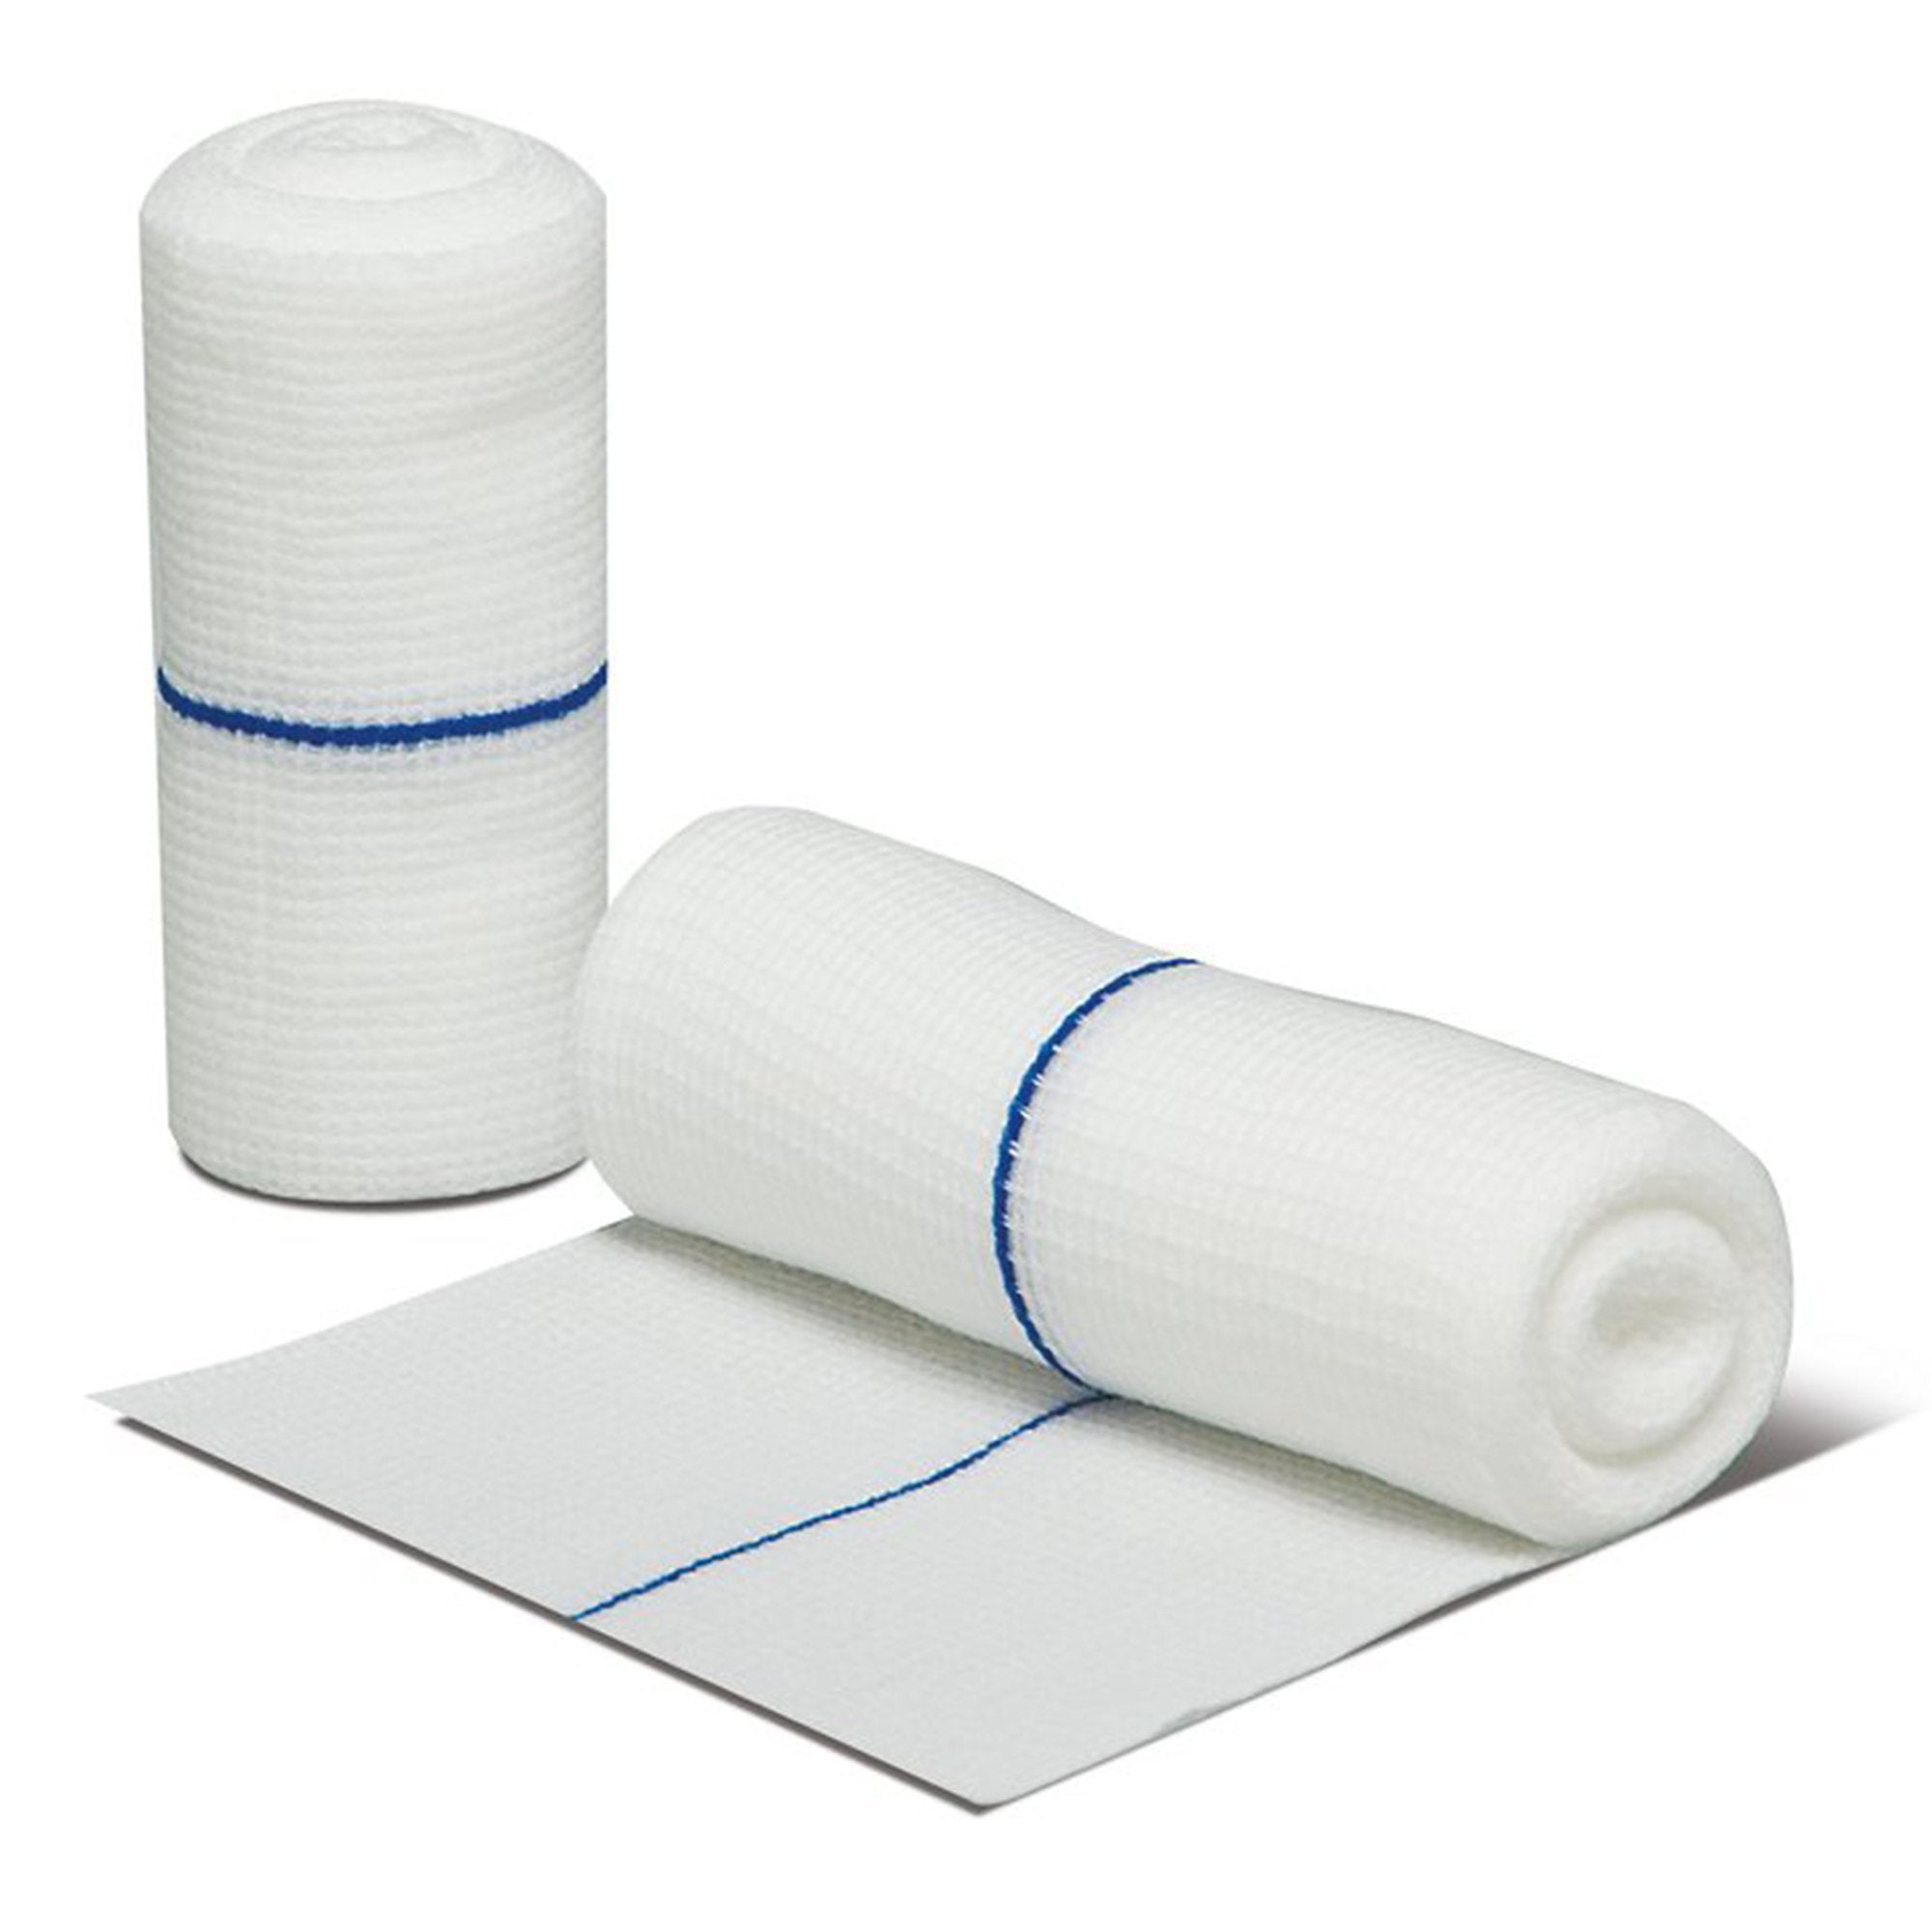 Conforming Bandage Flexicon® 3 Inch X 4-1/10 Yard 1 per Pack Sterile 1-Ply Roll Shape